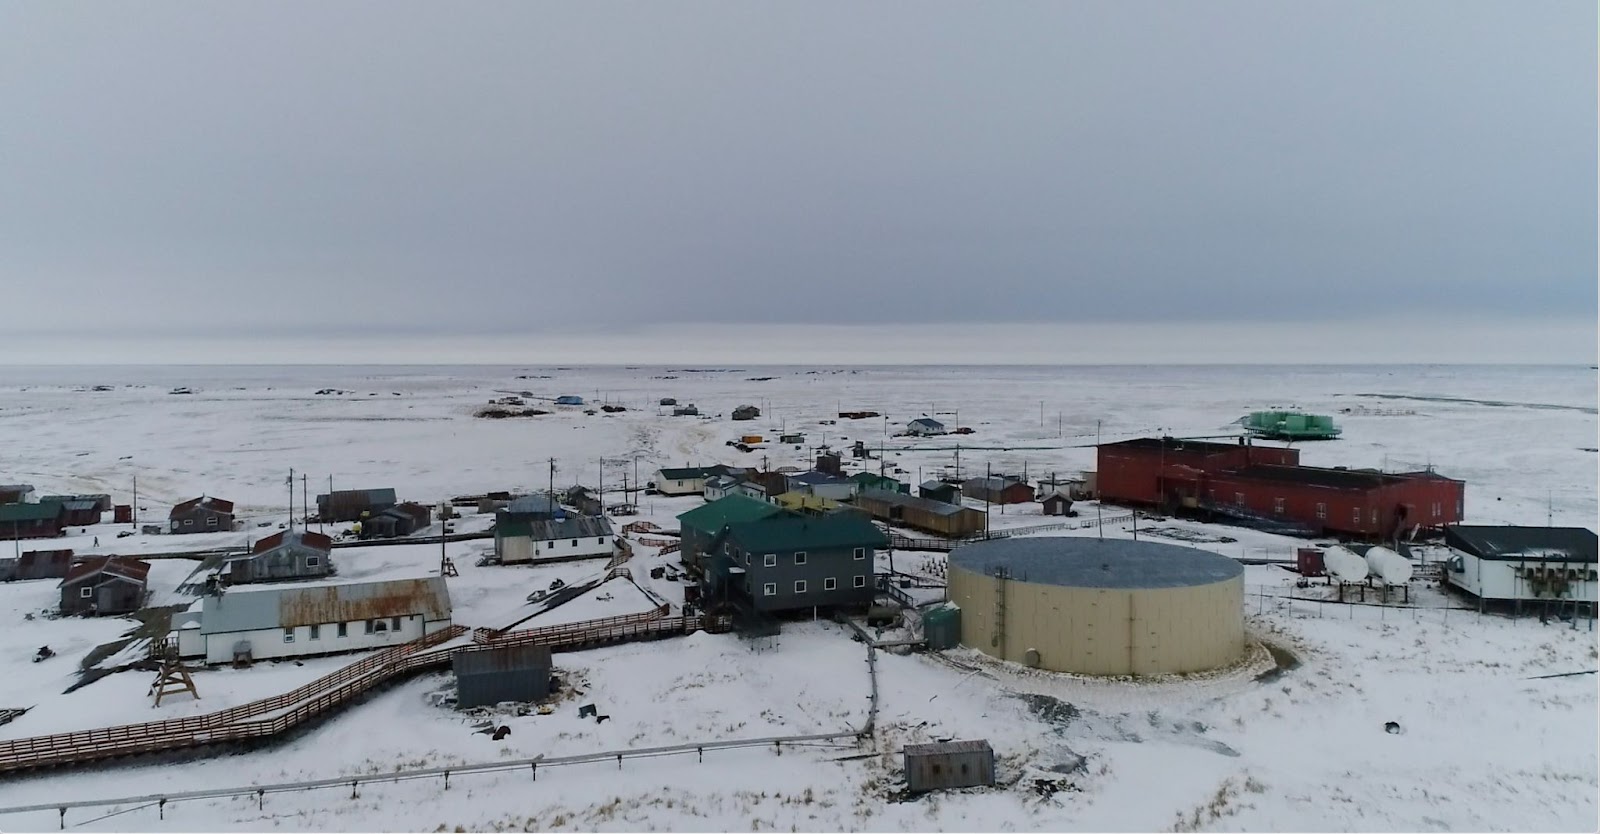 Kongiganak on Alaska’s Yukon-Kuskokwim Delta is not connected to any other community’s water or energy generation or distribution systems. Photo by Amanda Byrd.